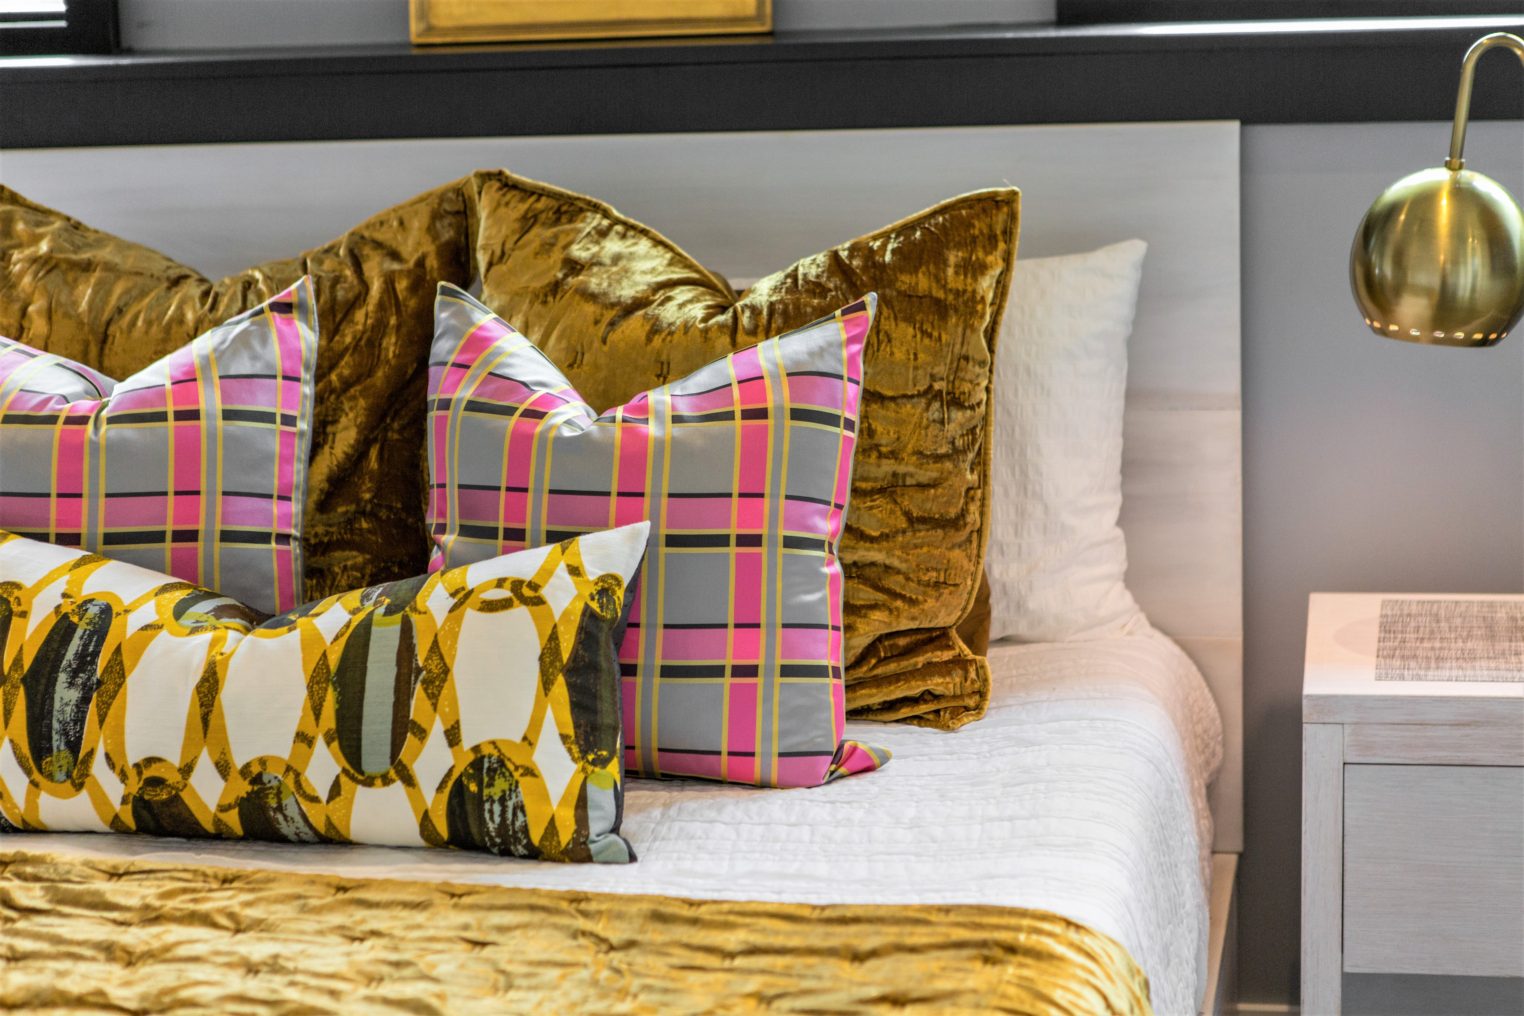 Luxury Deborah Main pillows in staging by Vazzo Spaces. Details on The Pillow Goddess Blog!